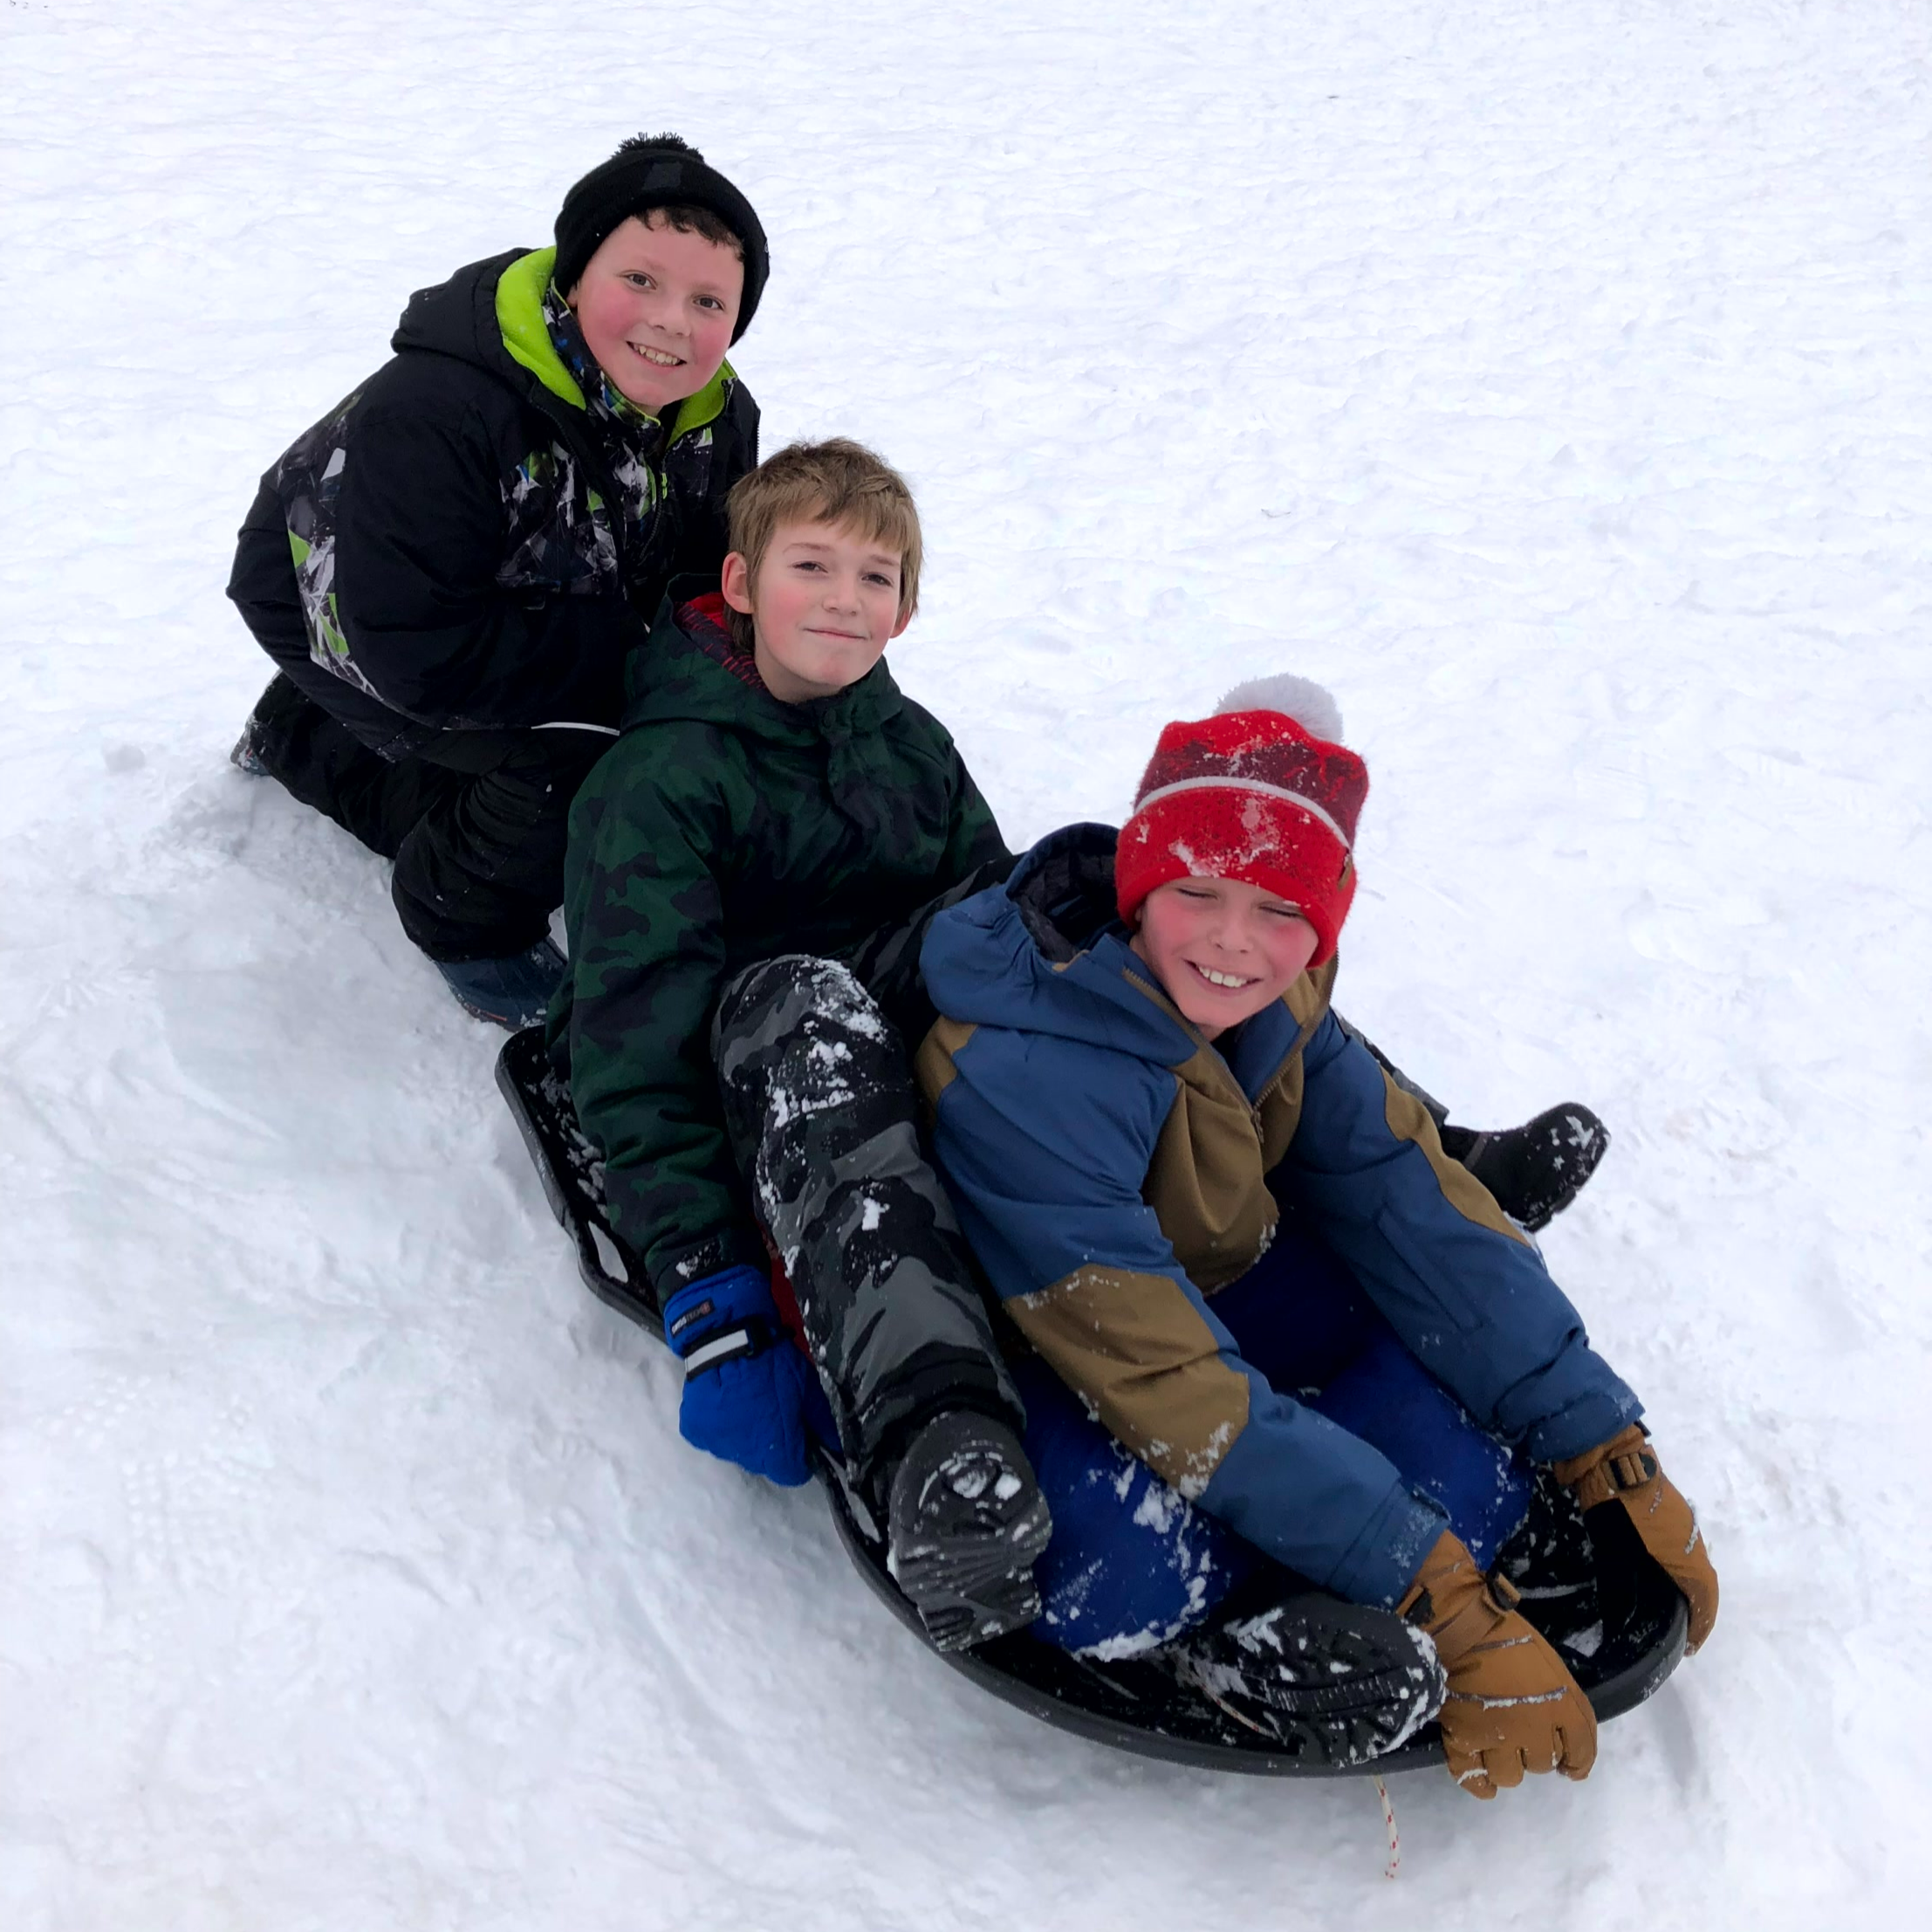 Three students sit on a sled